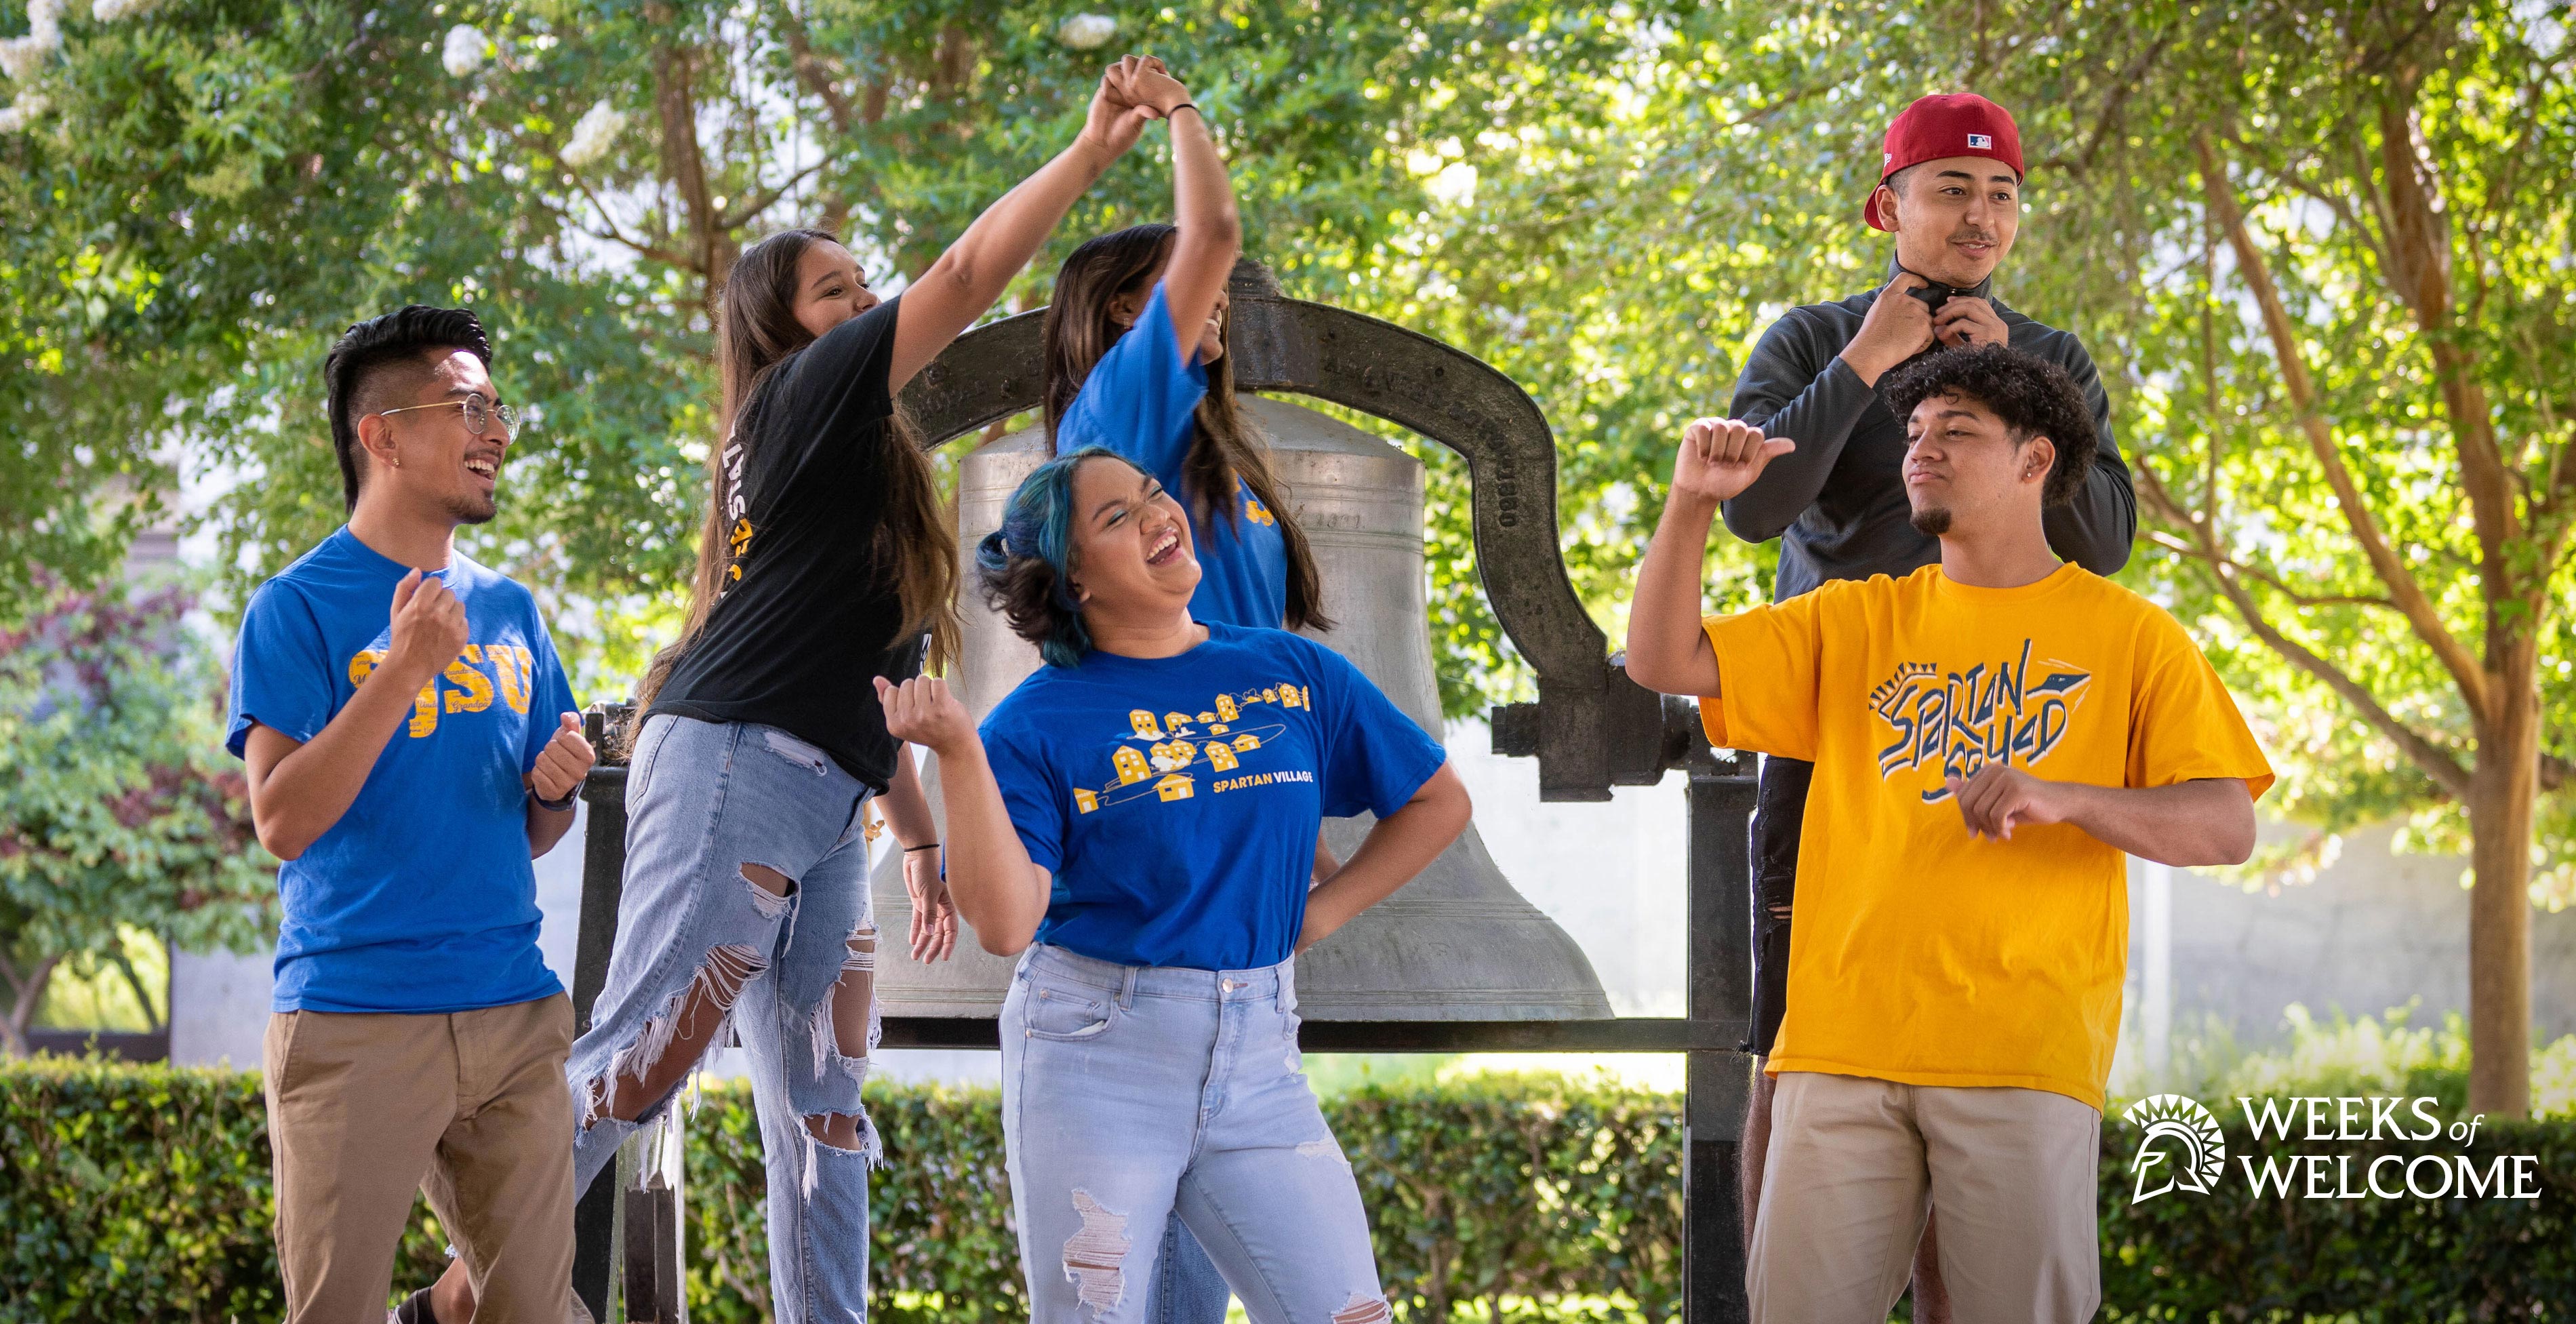 SJSU Students dancing and goofing around in front of the Tower Bell.